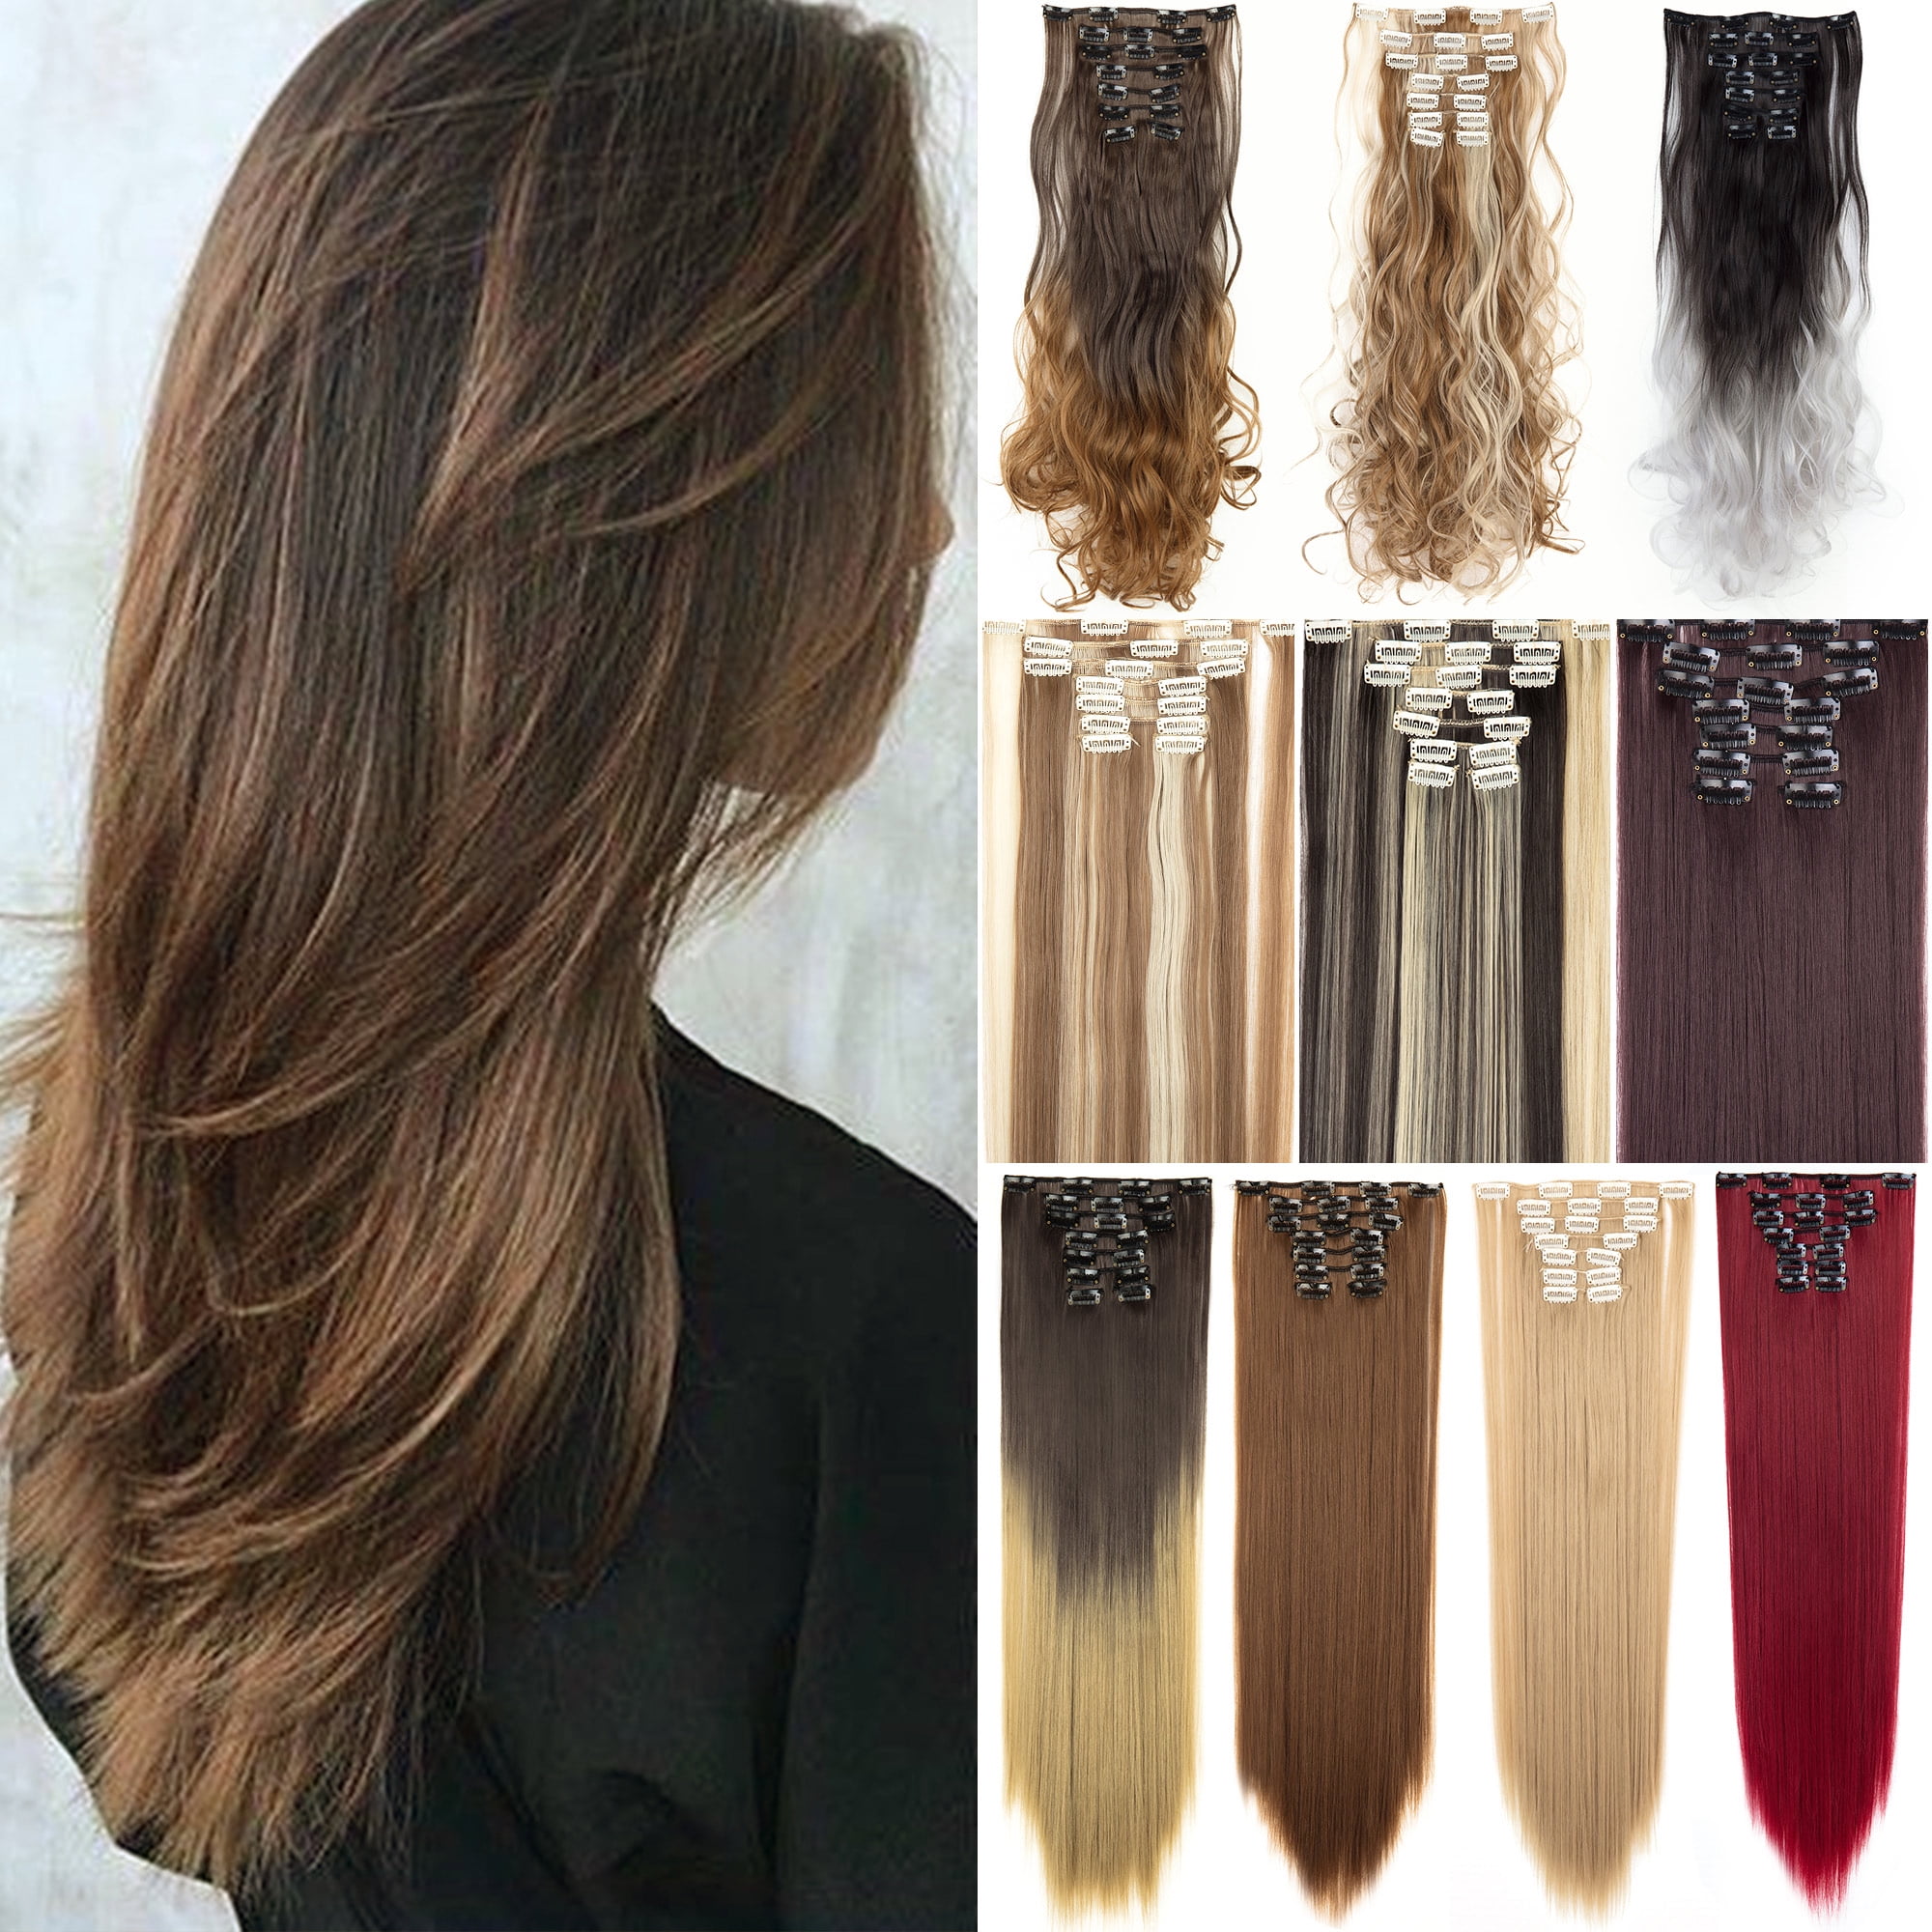  Dark Auburn (33) Clip in Hair Extensions - 100% Remy Human Hair  by Estelle's Secret, 16 Straight - 120g : Beauty & Personal Care